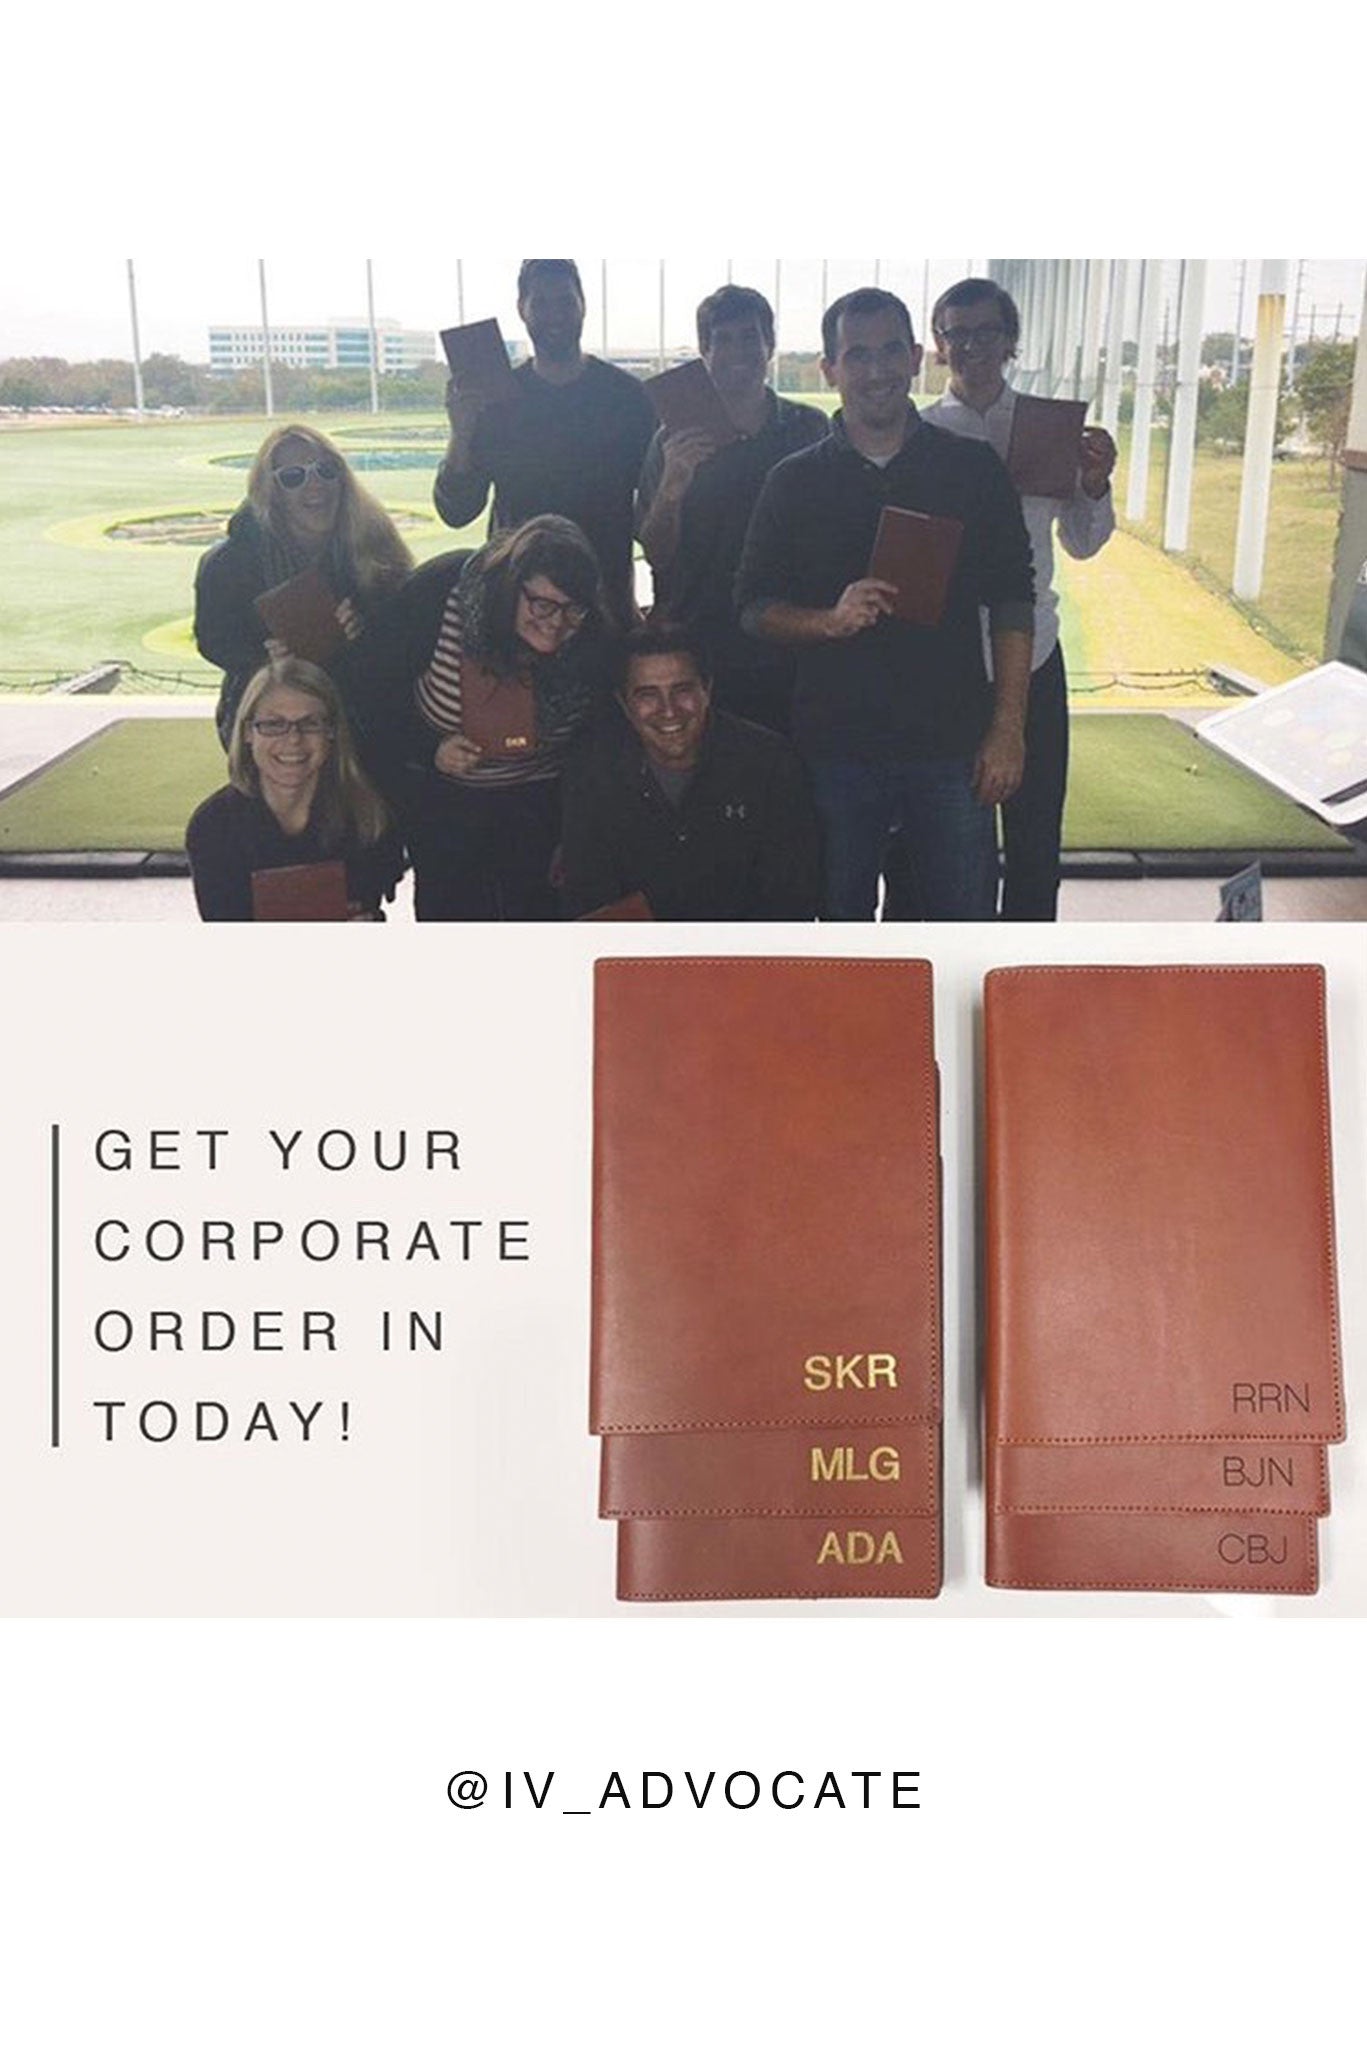 FOTO | Cognac Leather Journal - refillable genuine leather journal cover can be personalized with gold foil initials, a monogram or business logo making it the perfect personalized gift. 